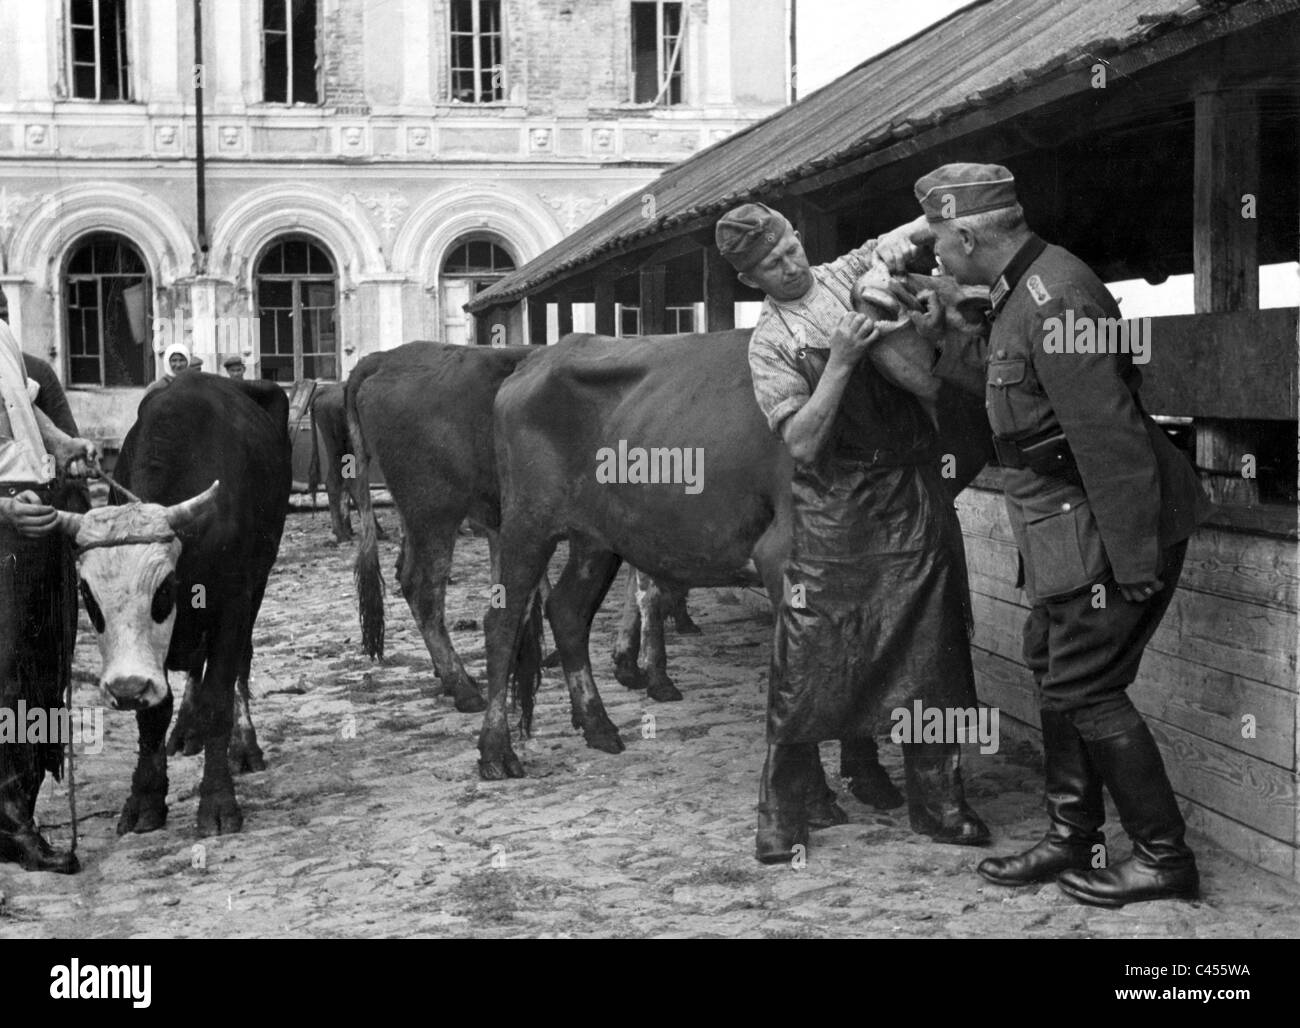 Examination of cattle in Russia, 1941 Stock Photo